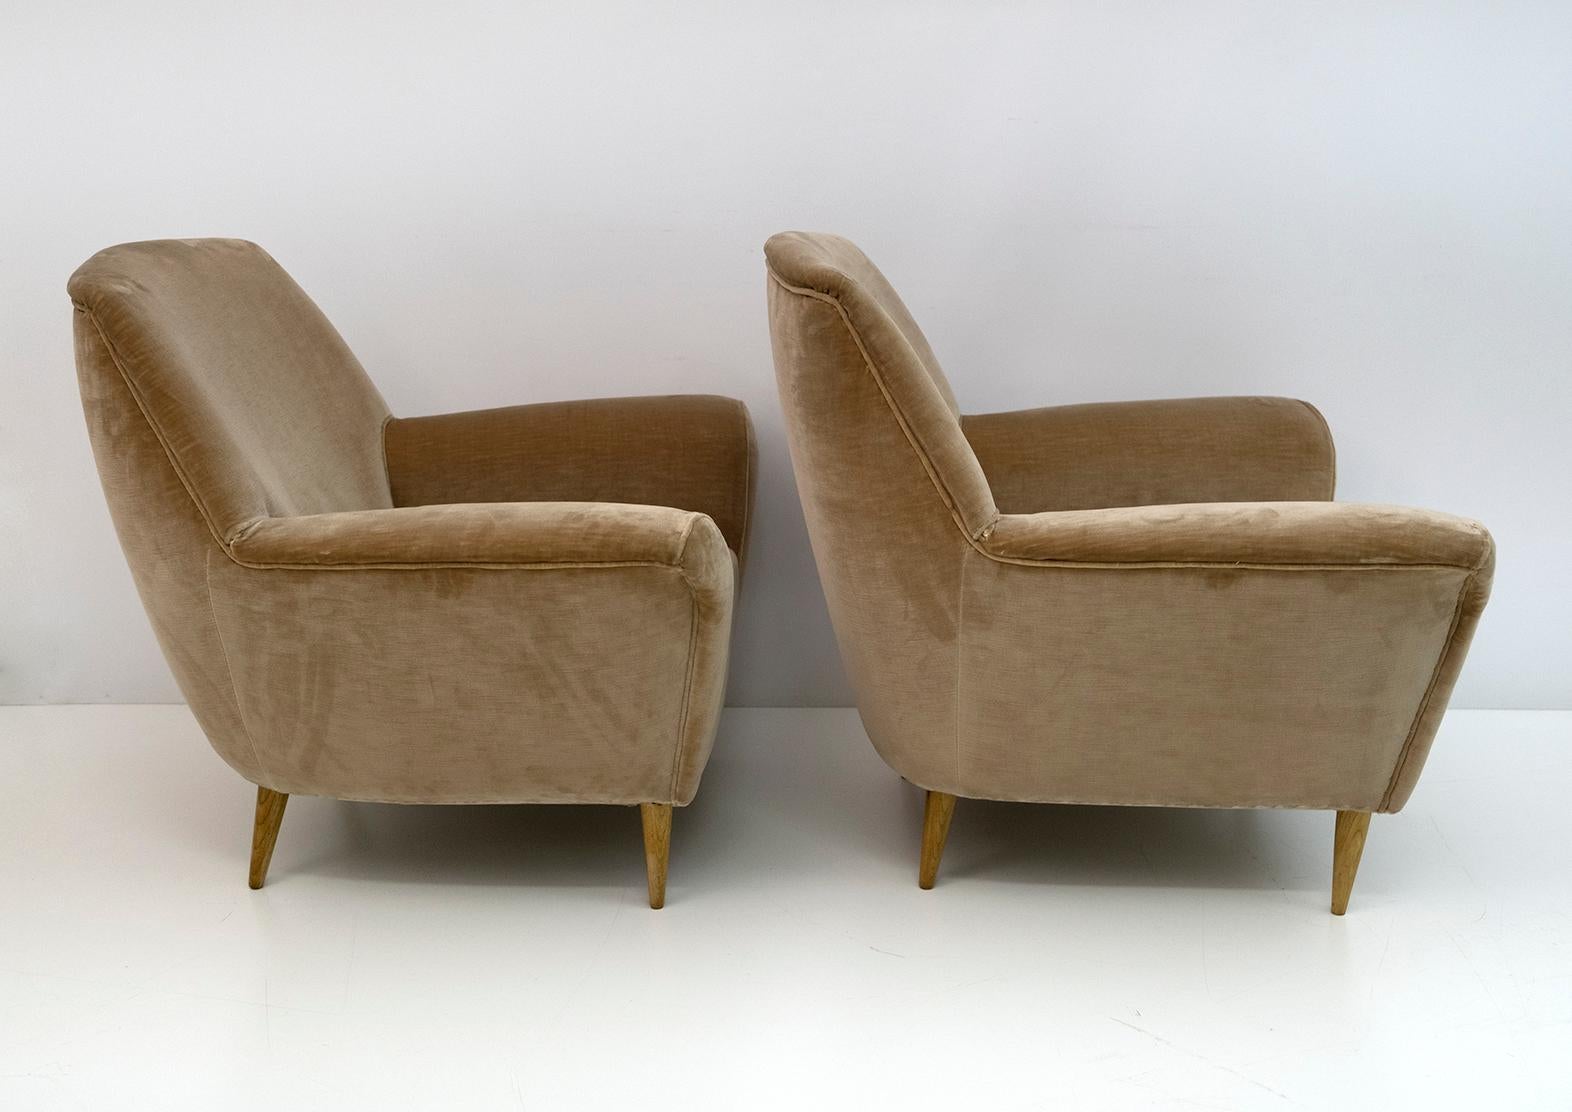 Mid-20th Century Pair of Ico Parisi Mid-Century Modern Curved Armchairs for Ariberto Colombo, 50s